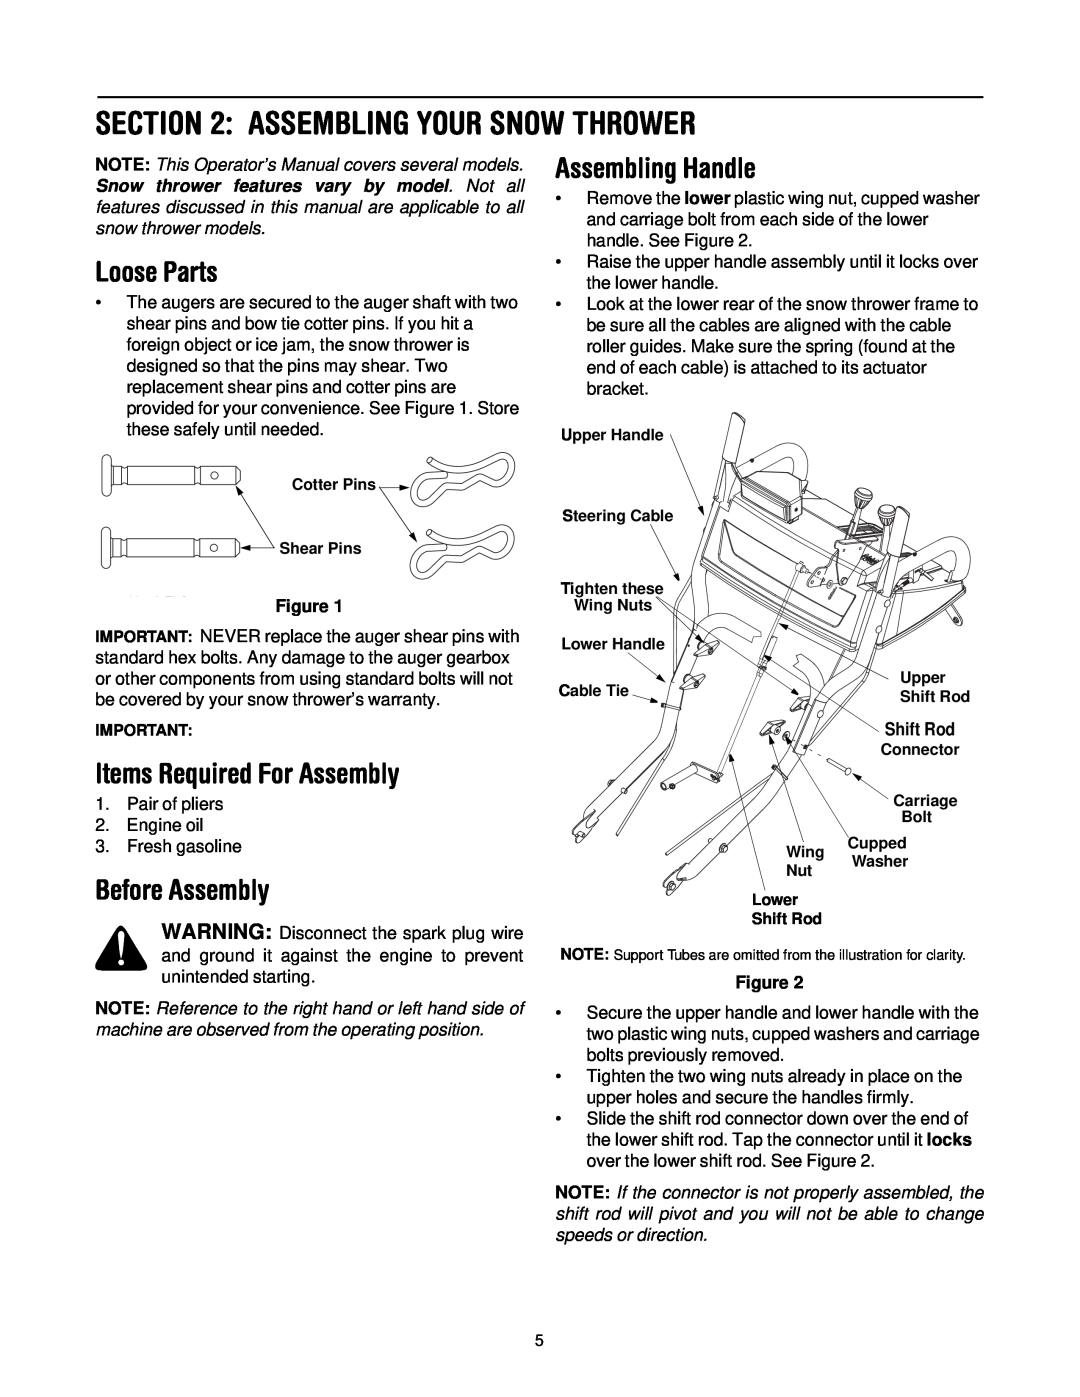 MTD OGST-3106 Assembling Your Snow Thrower, Loose Parts, Items Required For Assembly, Before Assembly, Assembling Handle 